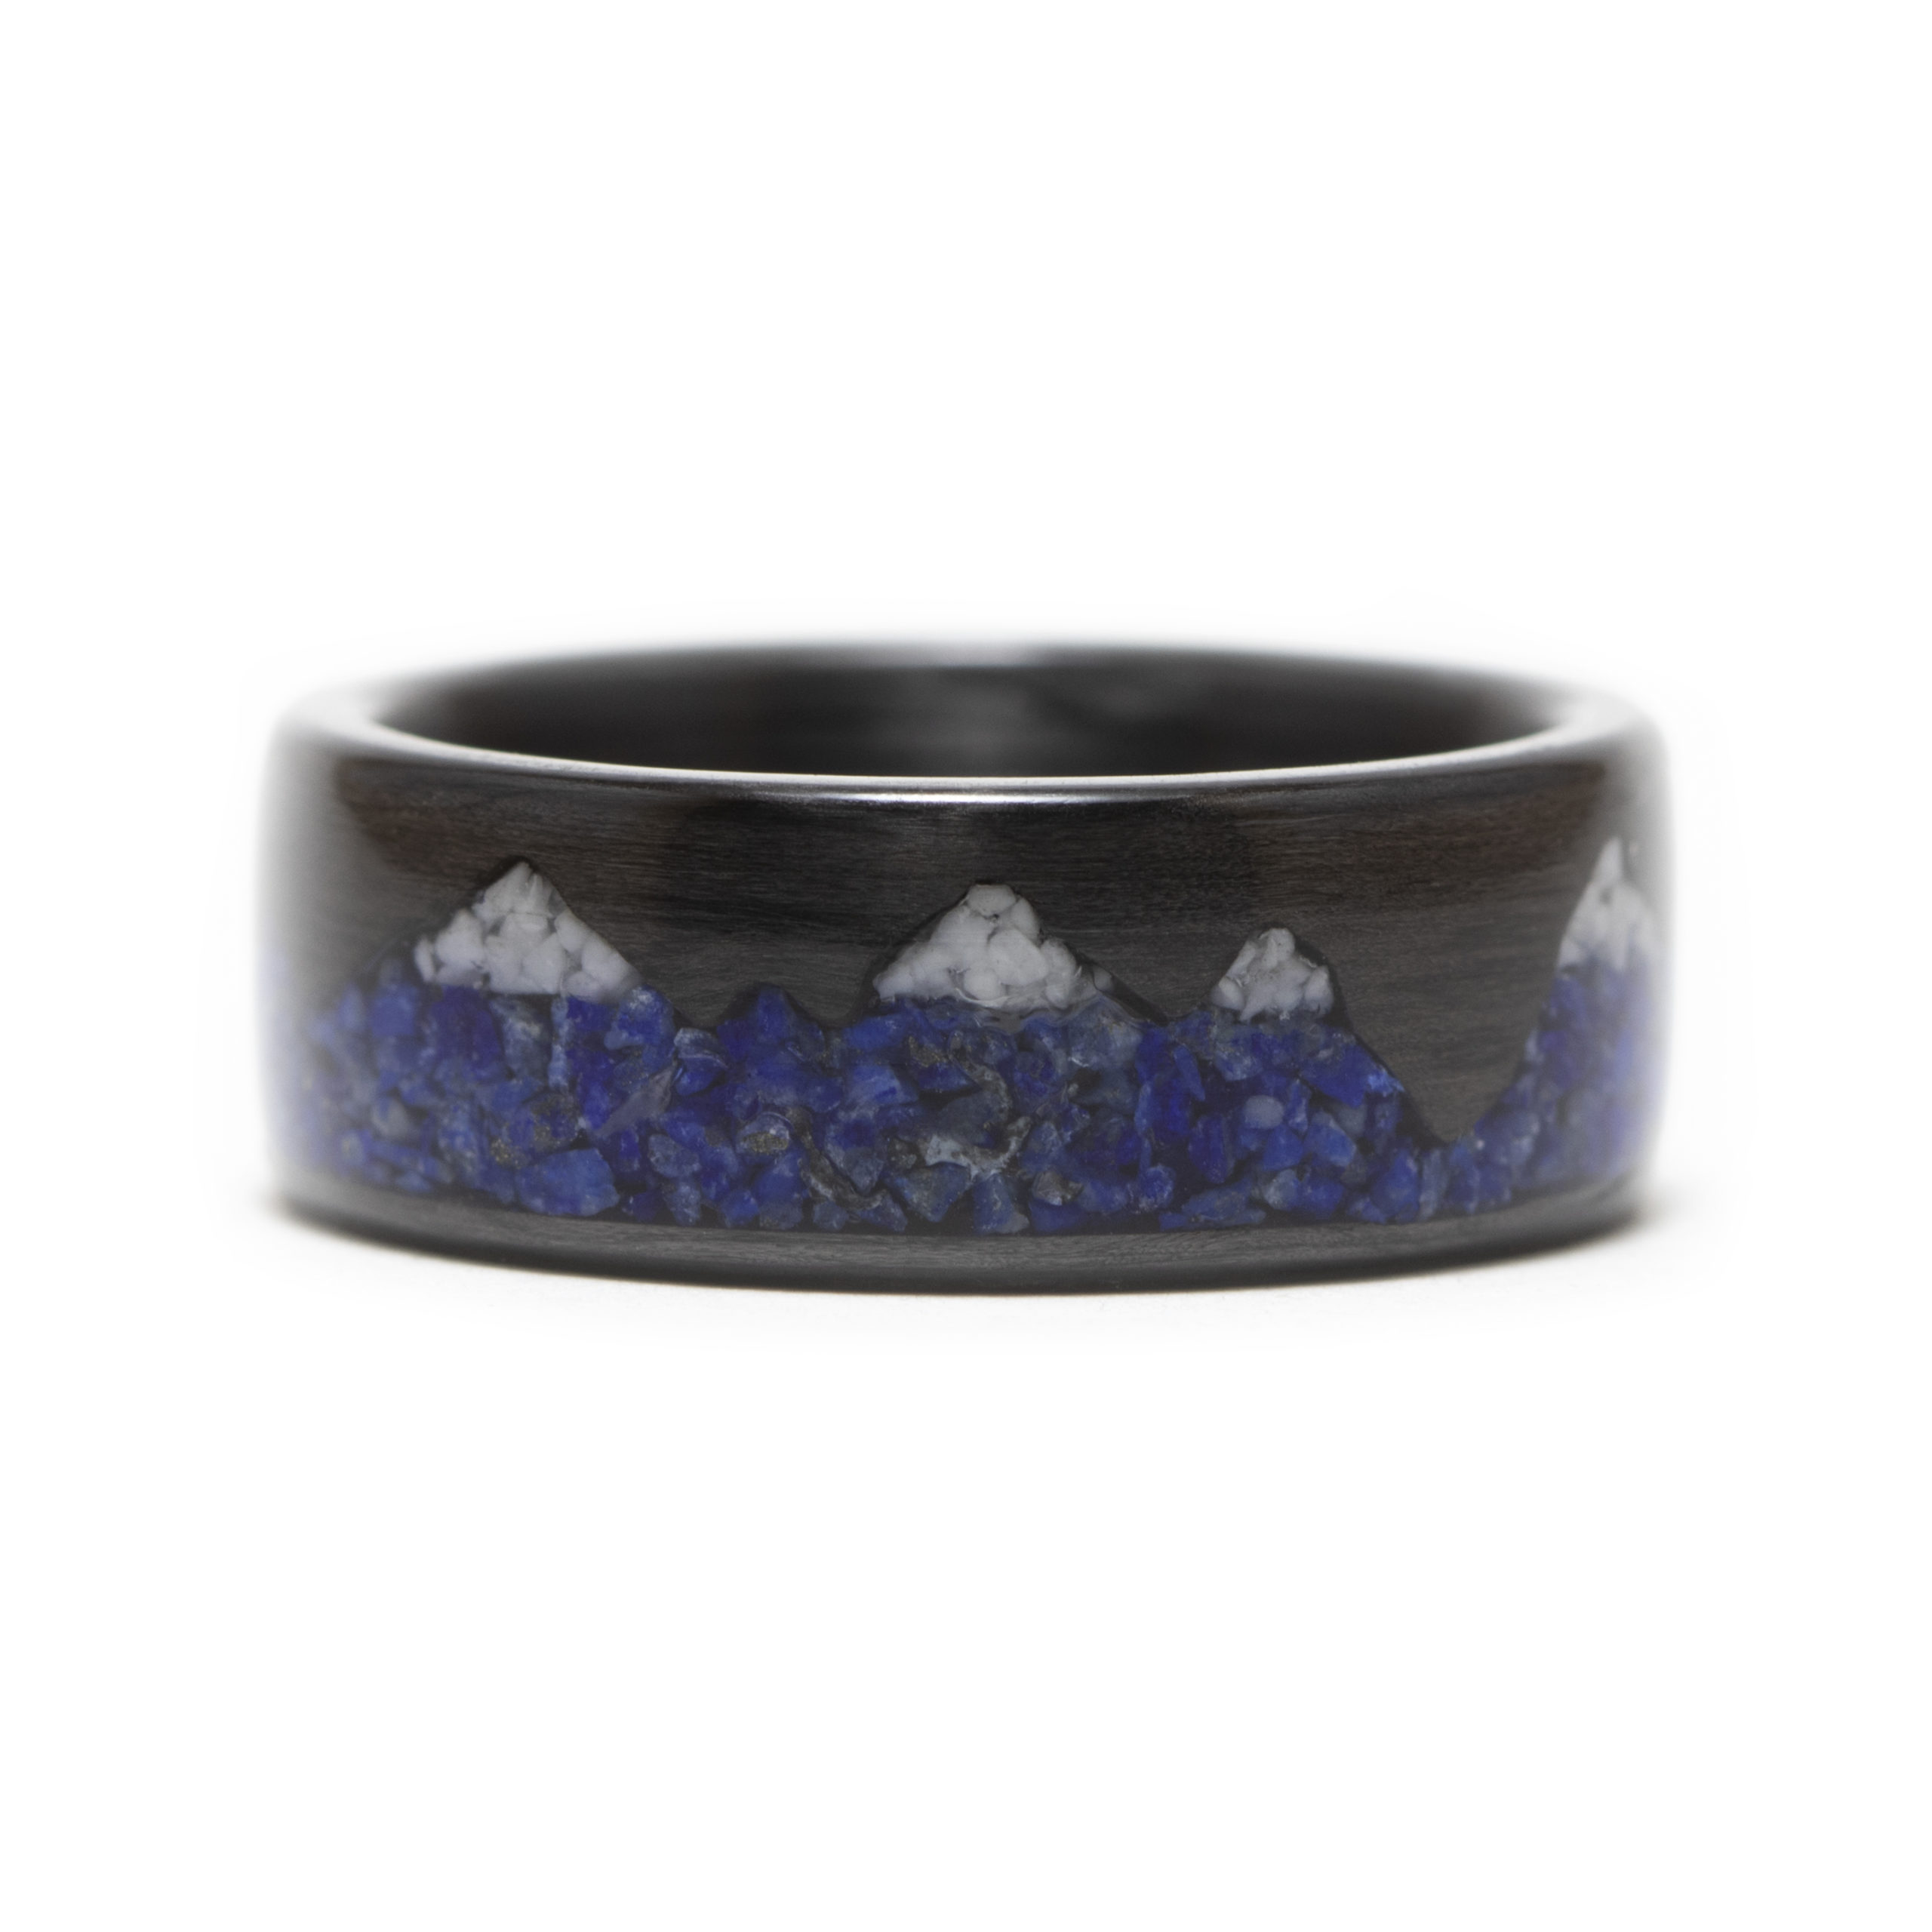 Carbon Fiber Ring With Lapis Lazuli And Howlite Stone Inlay (Mountains Design)